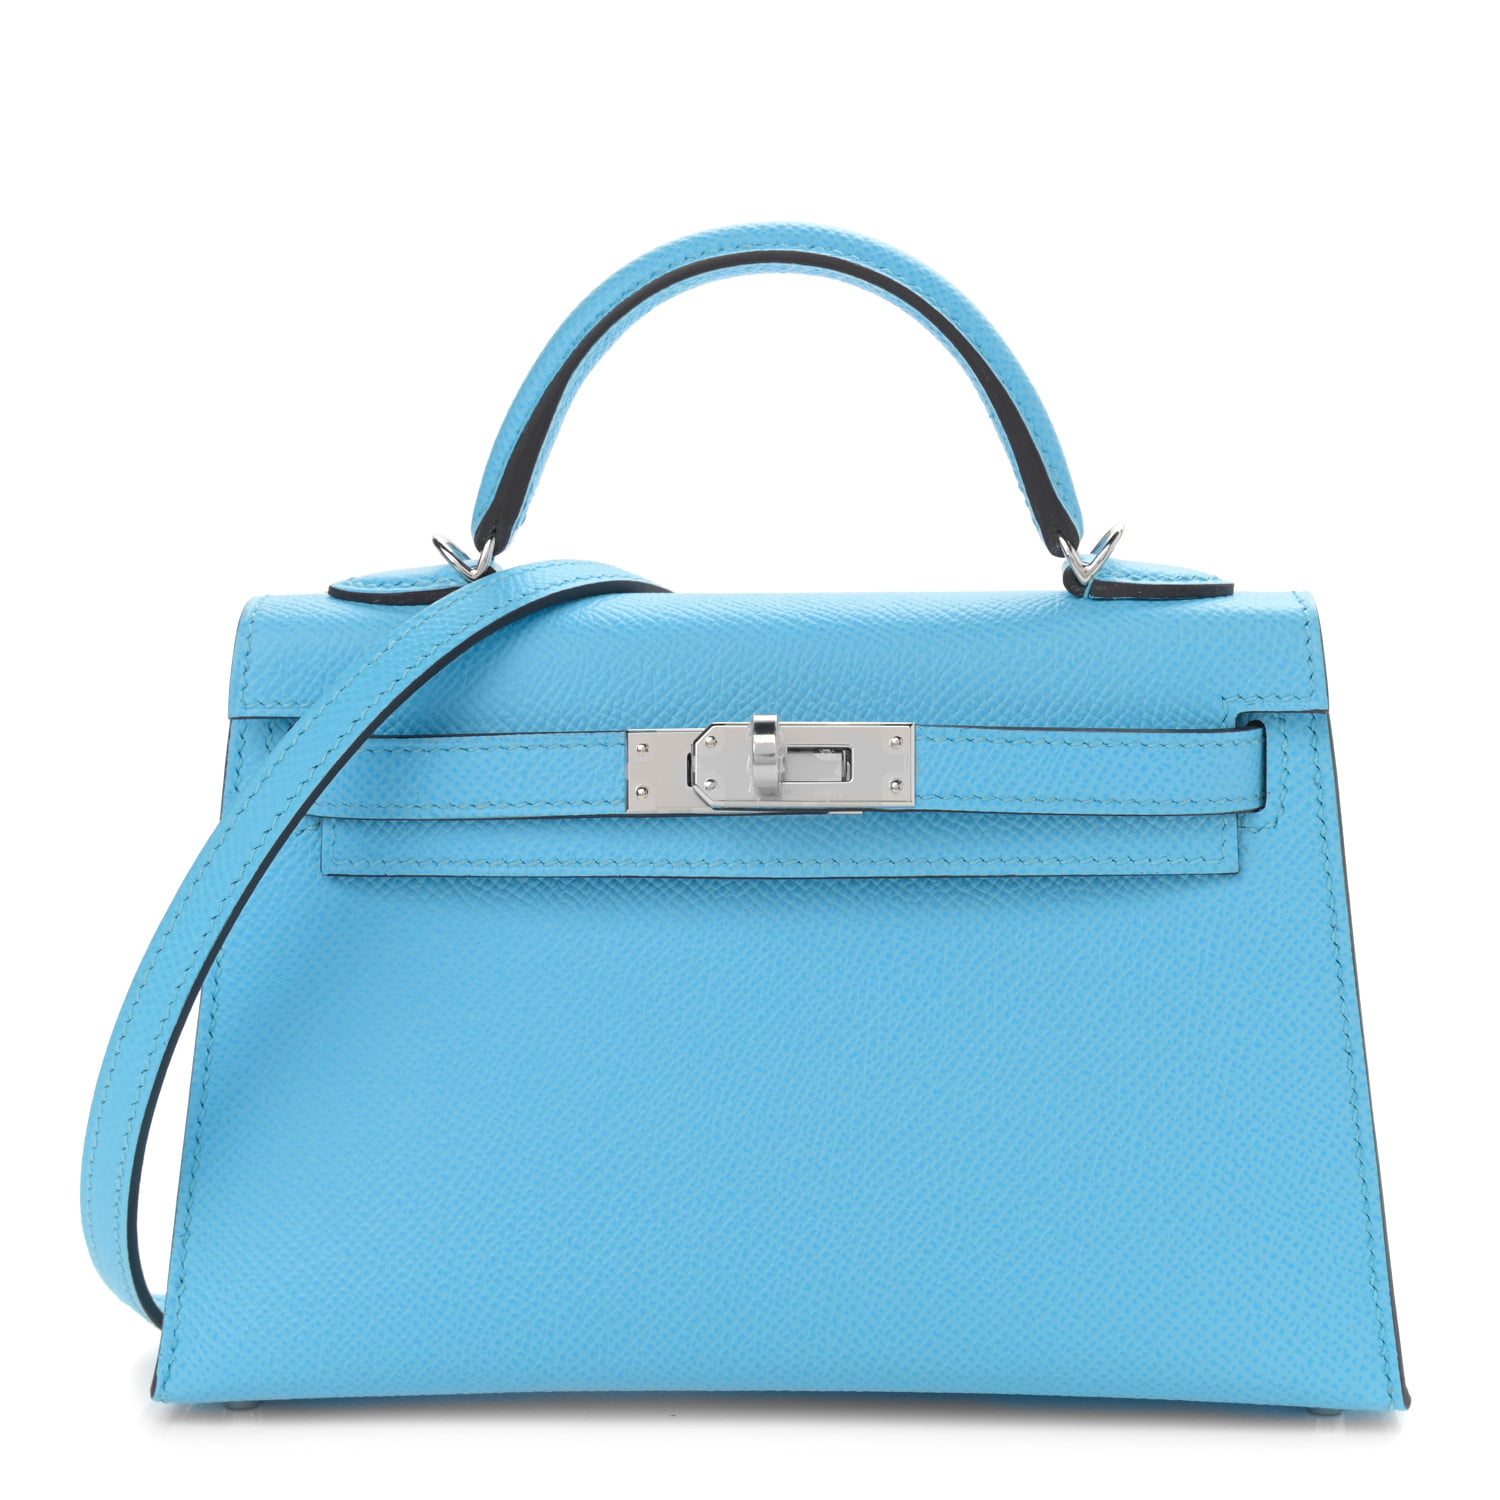 Hermès Mini Kelly and other Hermès Mini Bags - Everything You Need to Know  About Them 